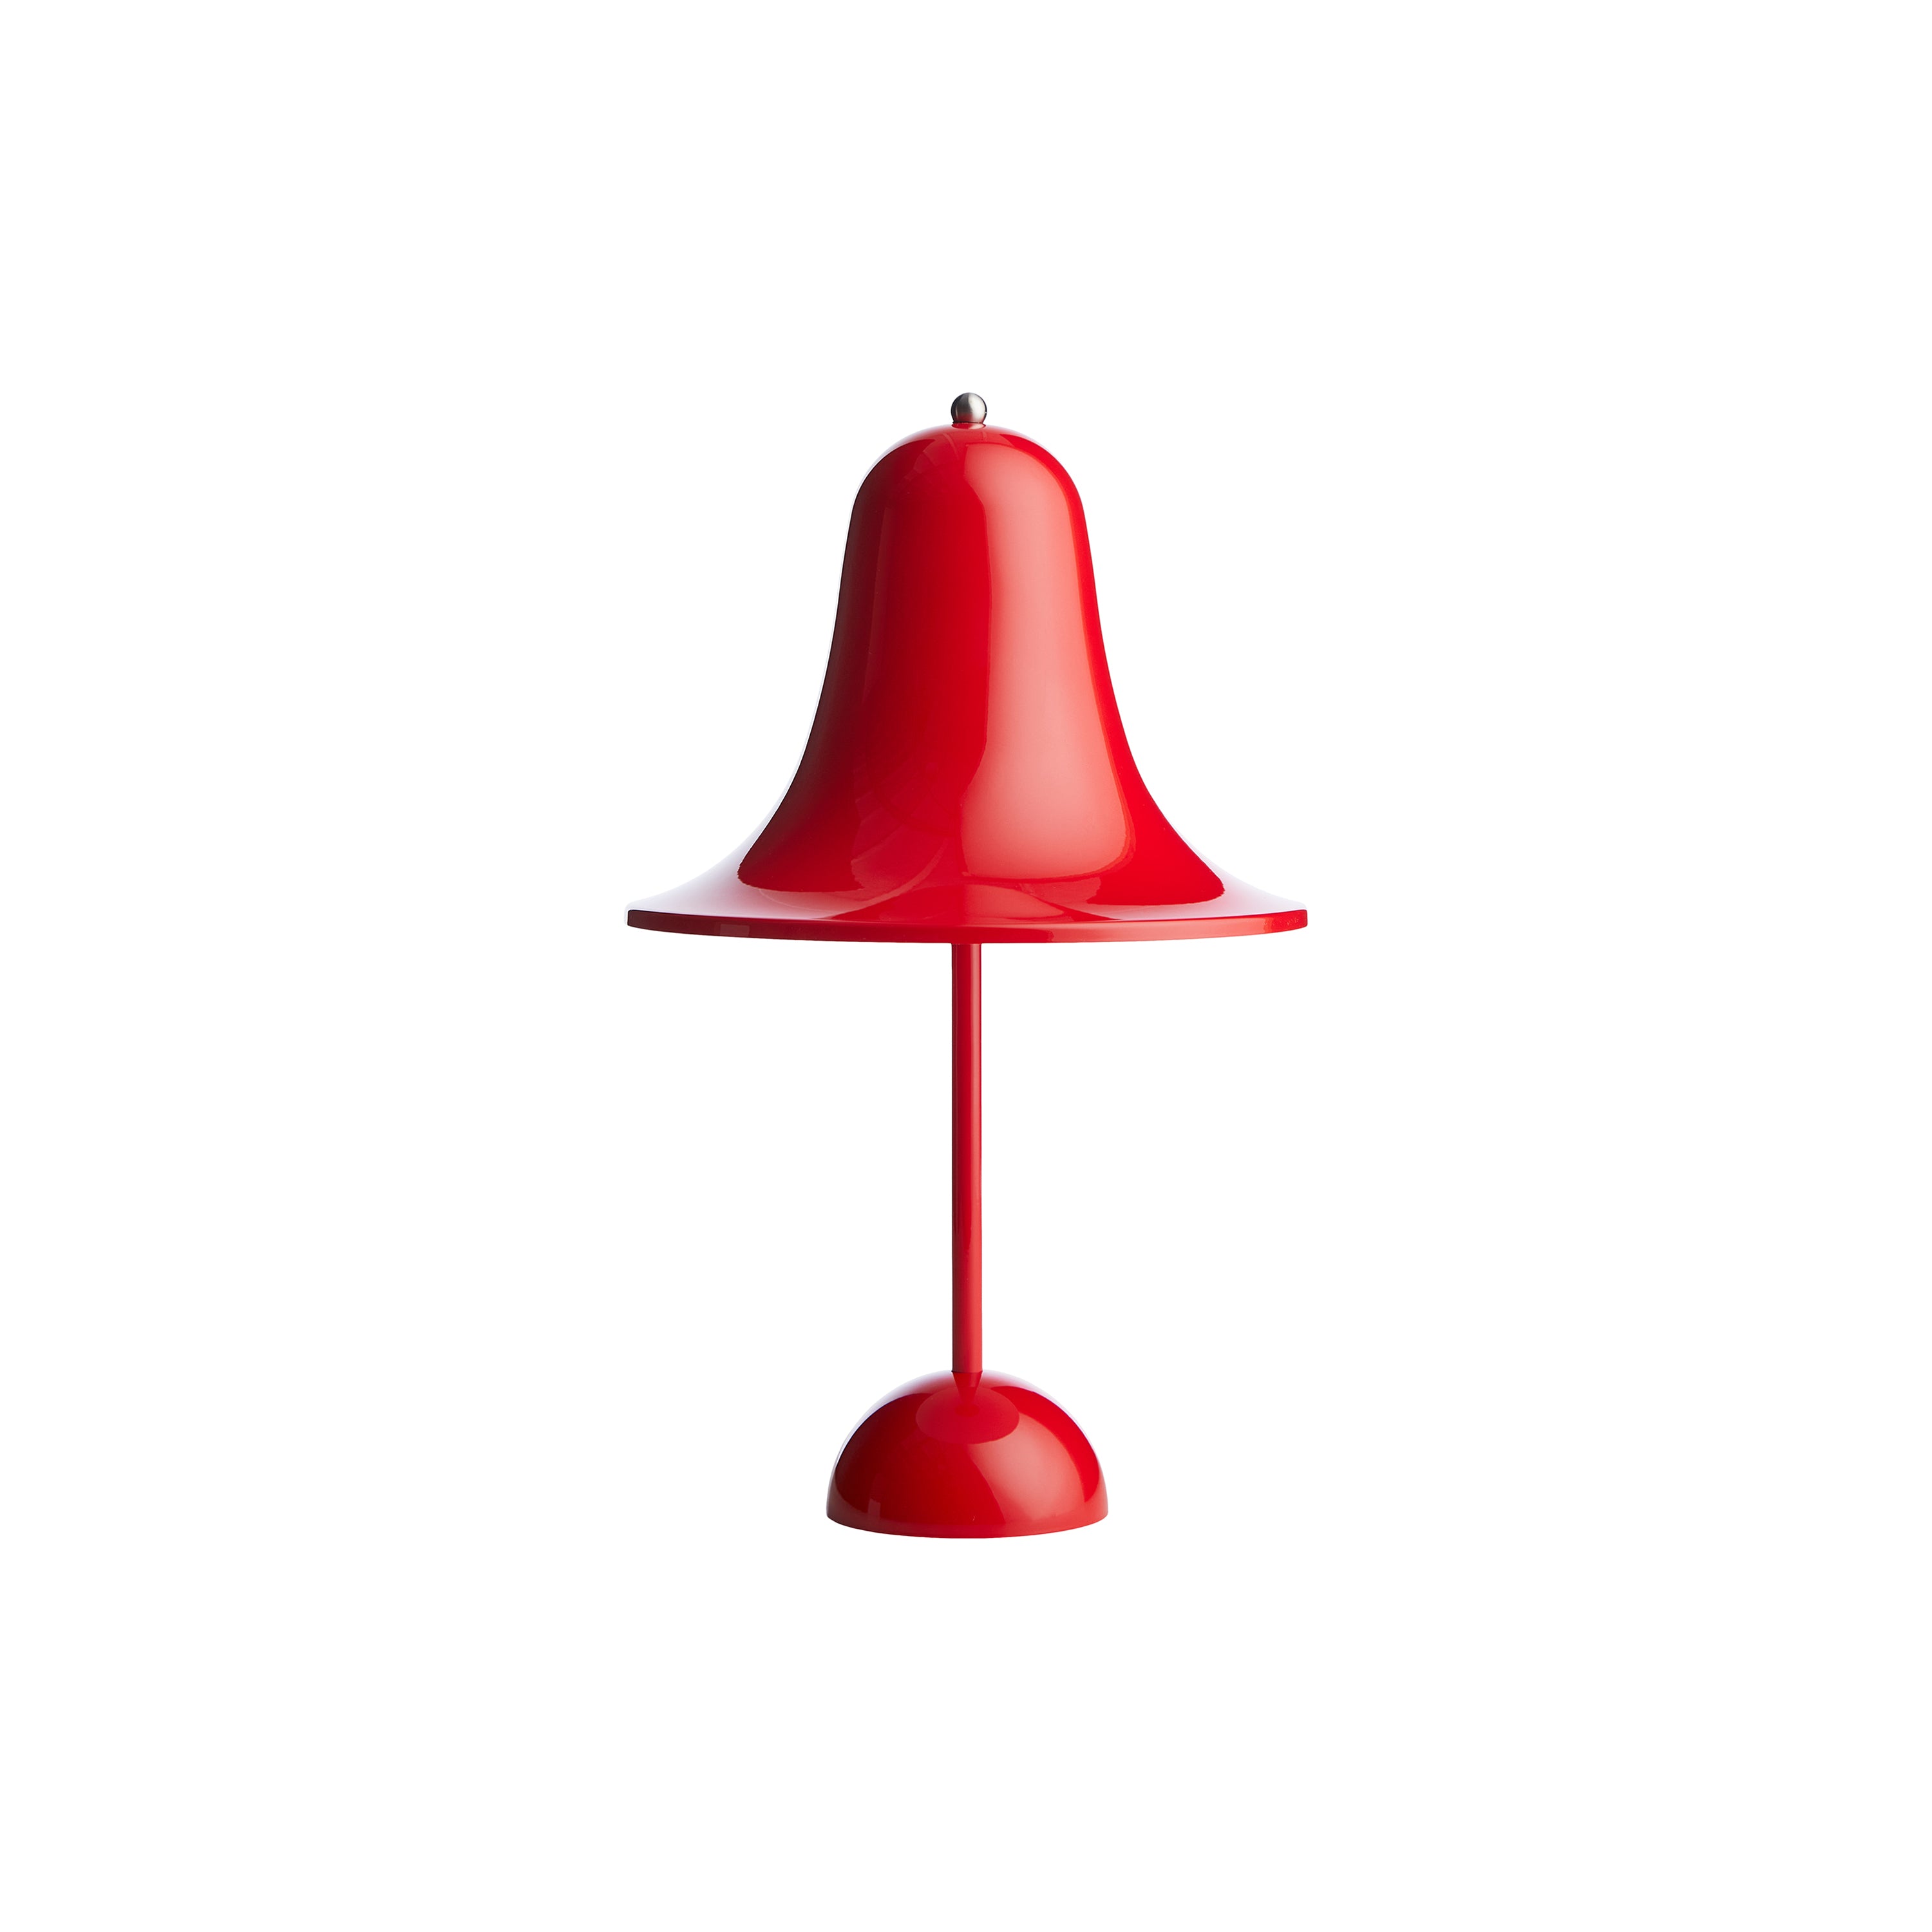 Pantop Portable Table Lamp: Bright Red